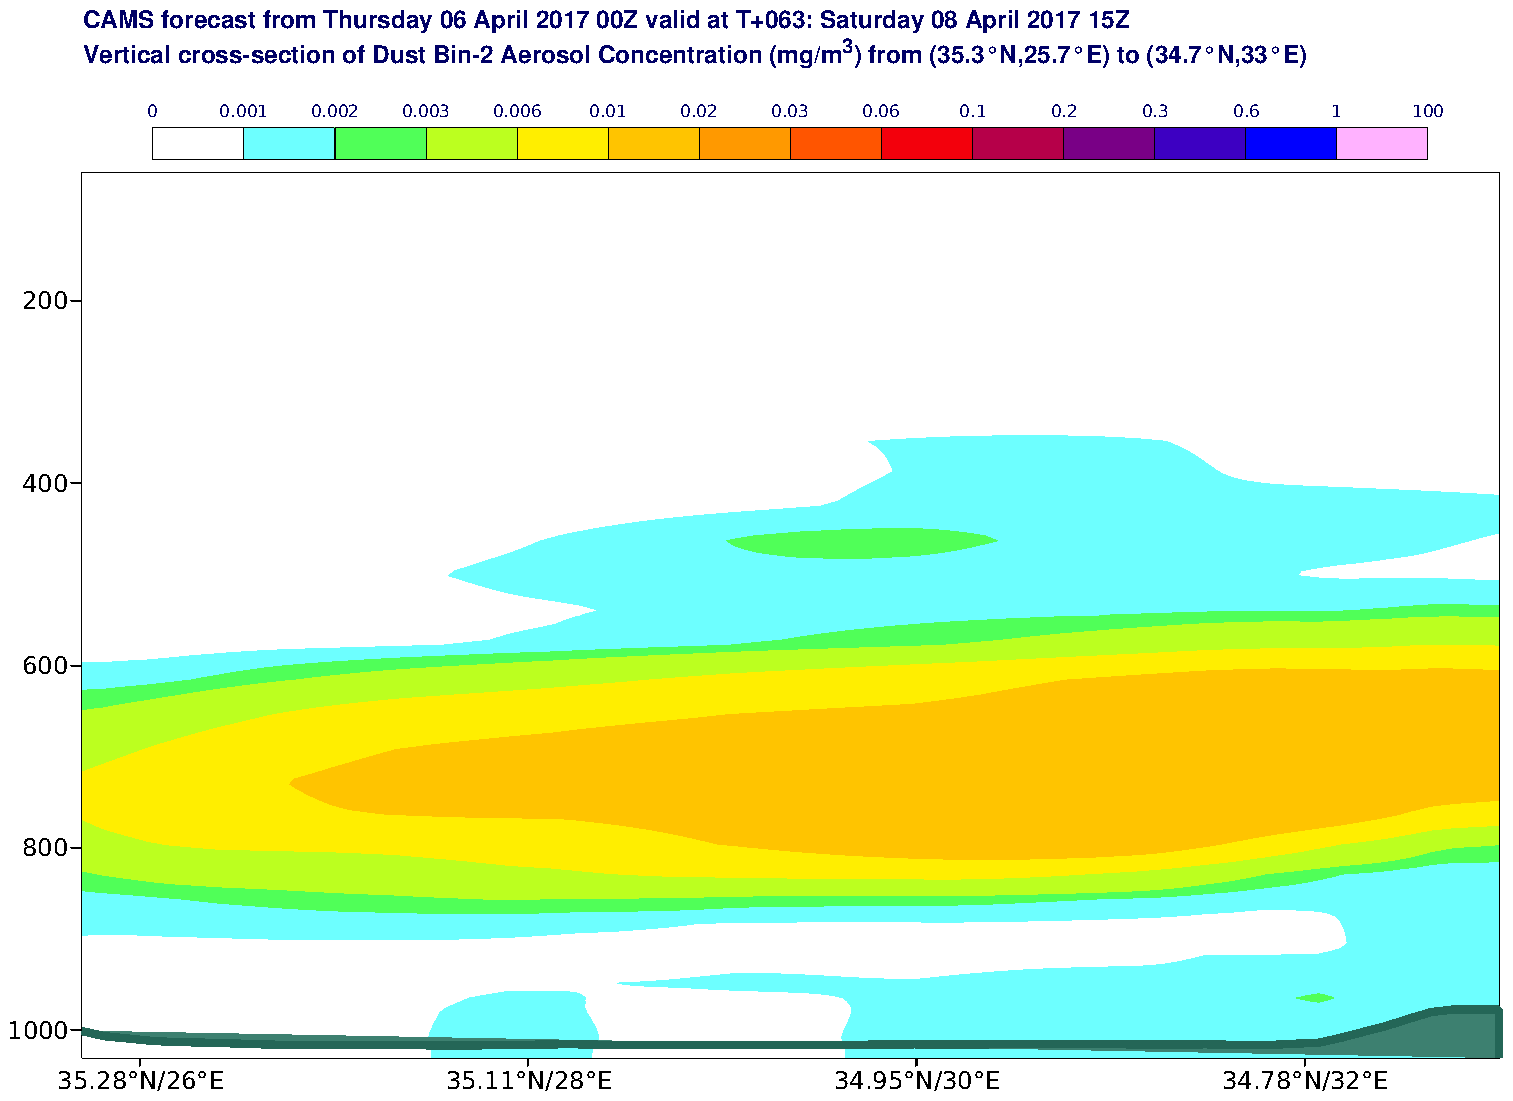 Vertical cross-section of Dust Bin-2 Aerosol Concentration (mg/m3) valid at T63 - 2017-04-08 15:00